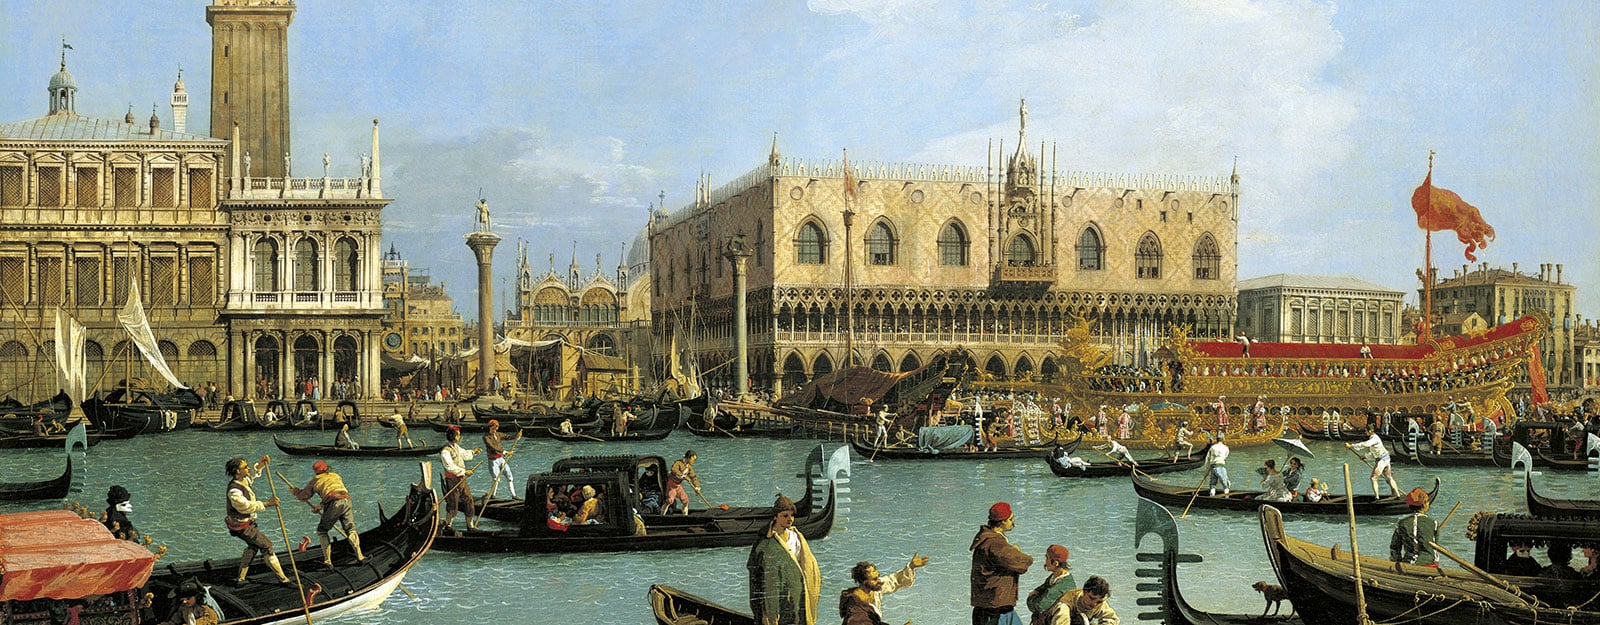 Details of gondola on a Venice canal